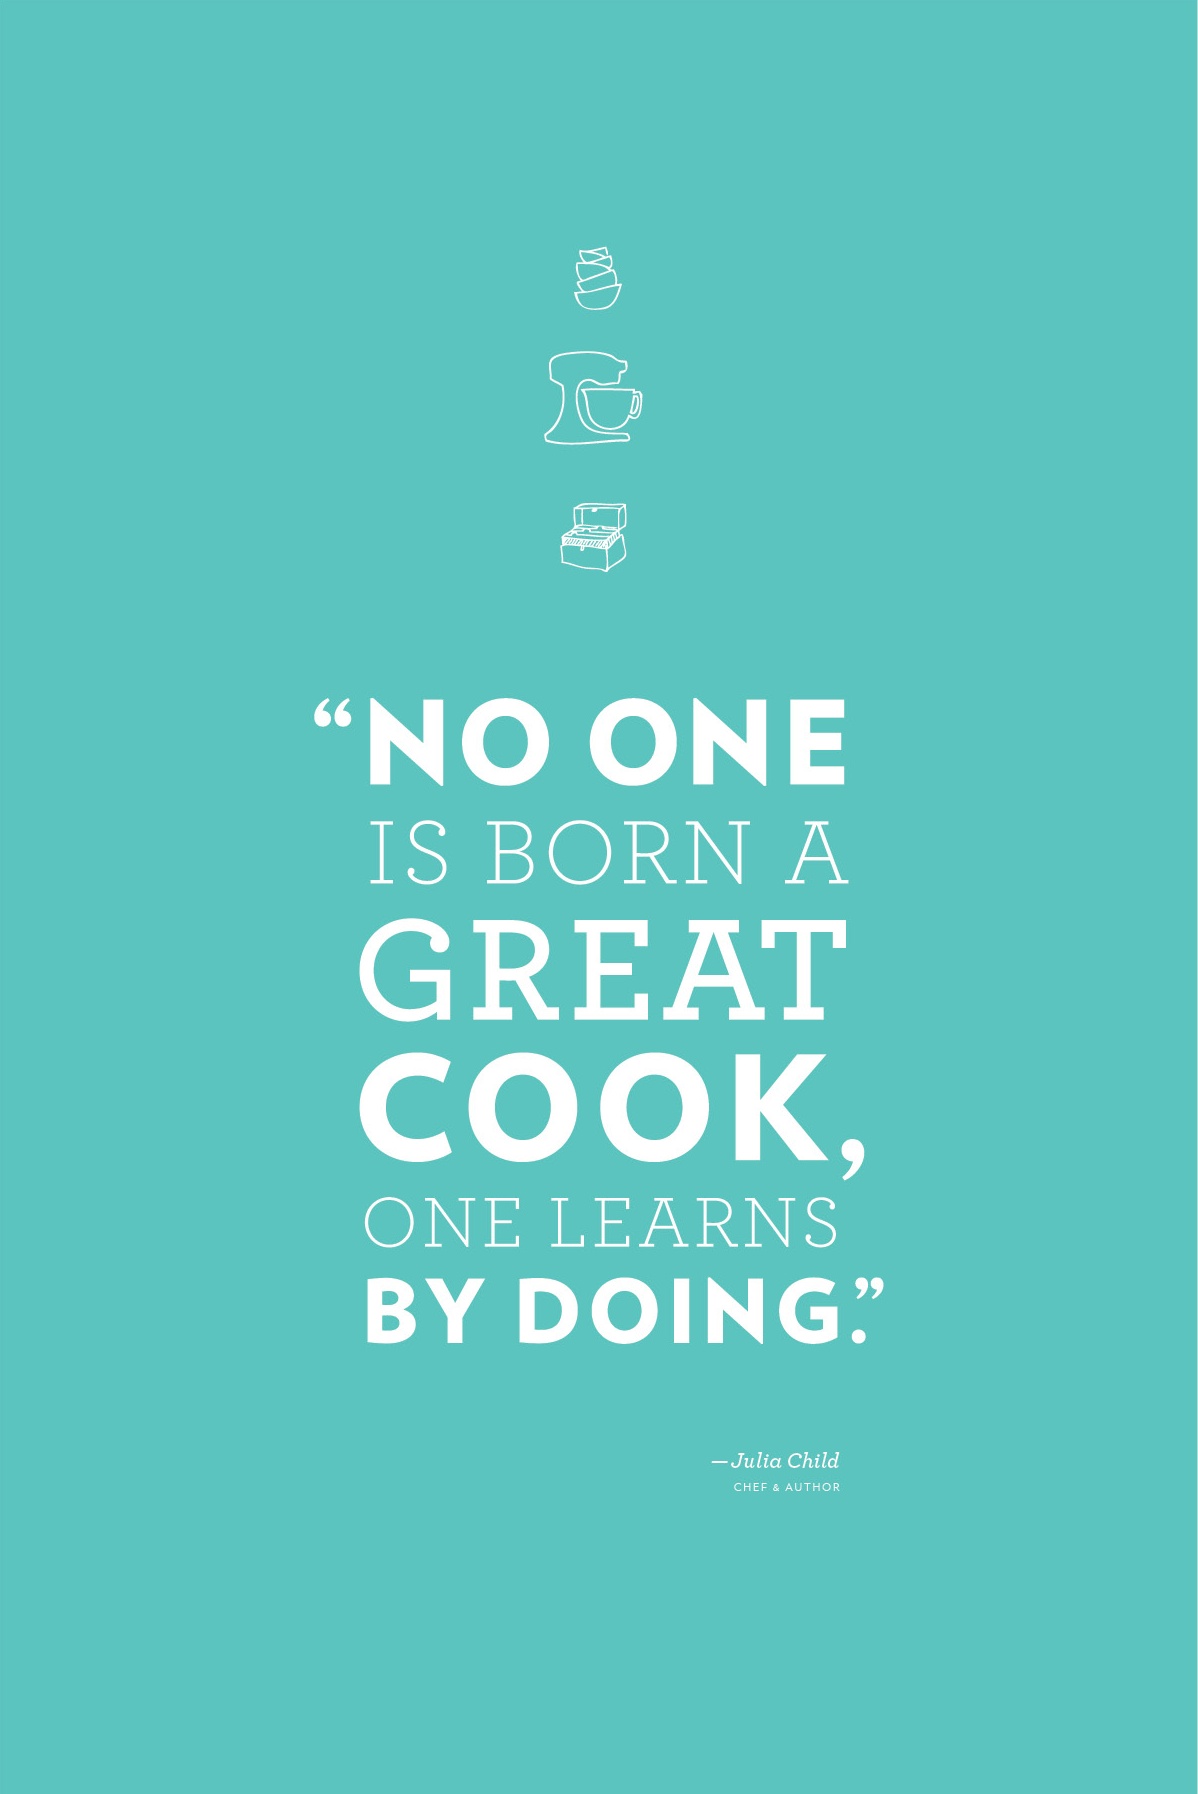 Food Sayings And Quotes - Lsat - HD Wallpaper 